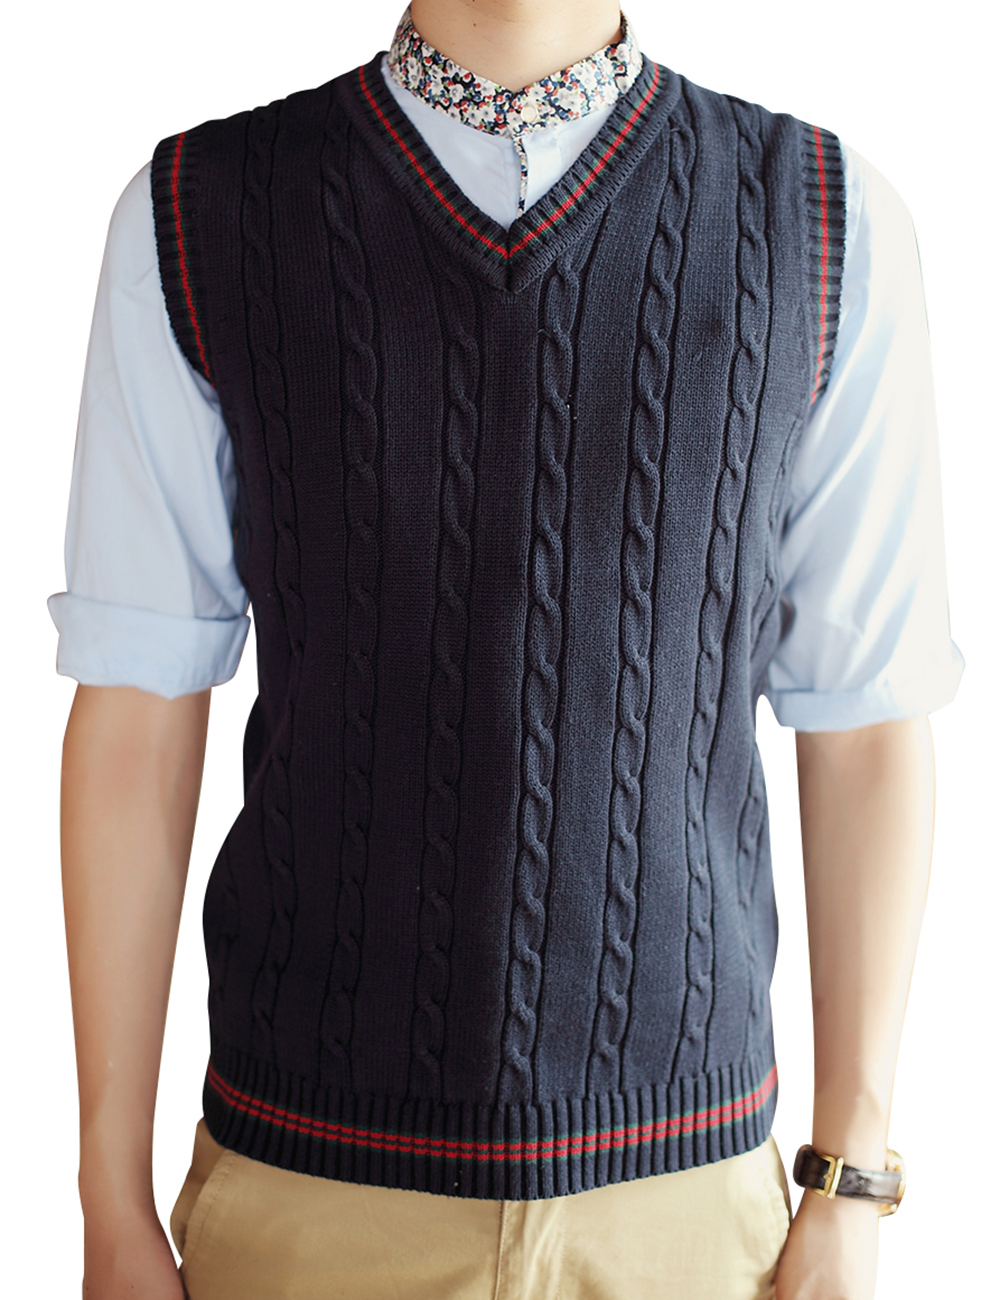 TopTie Mens Sweater Vest V Neck Sleeveless Pullover Cable Knit Business